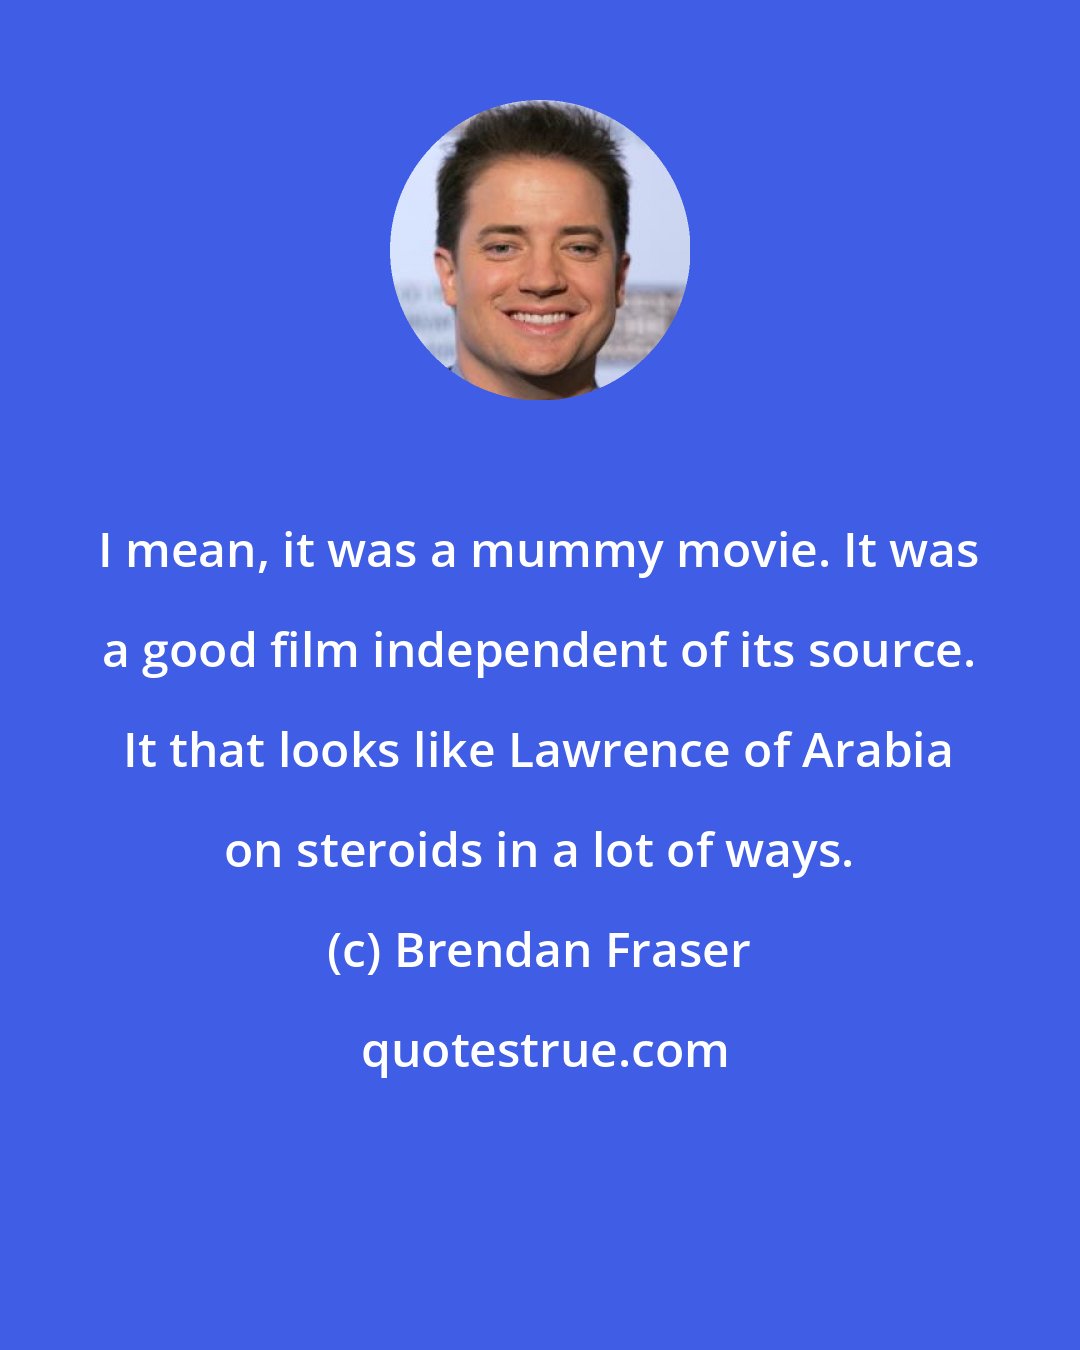 Brendan Fraser: I mean, it was a mummy movie. It was a good film independent of its source. It that looks like Lawrence of Arabia on steroids in a lot of ways.